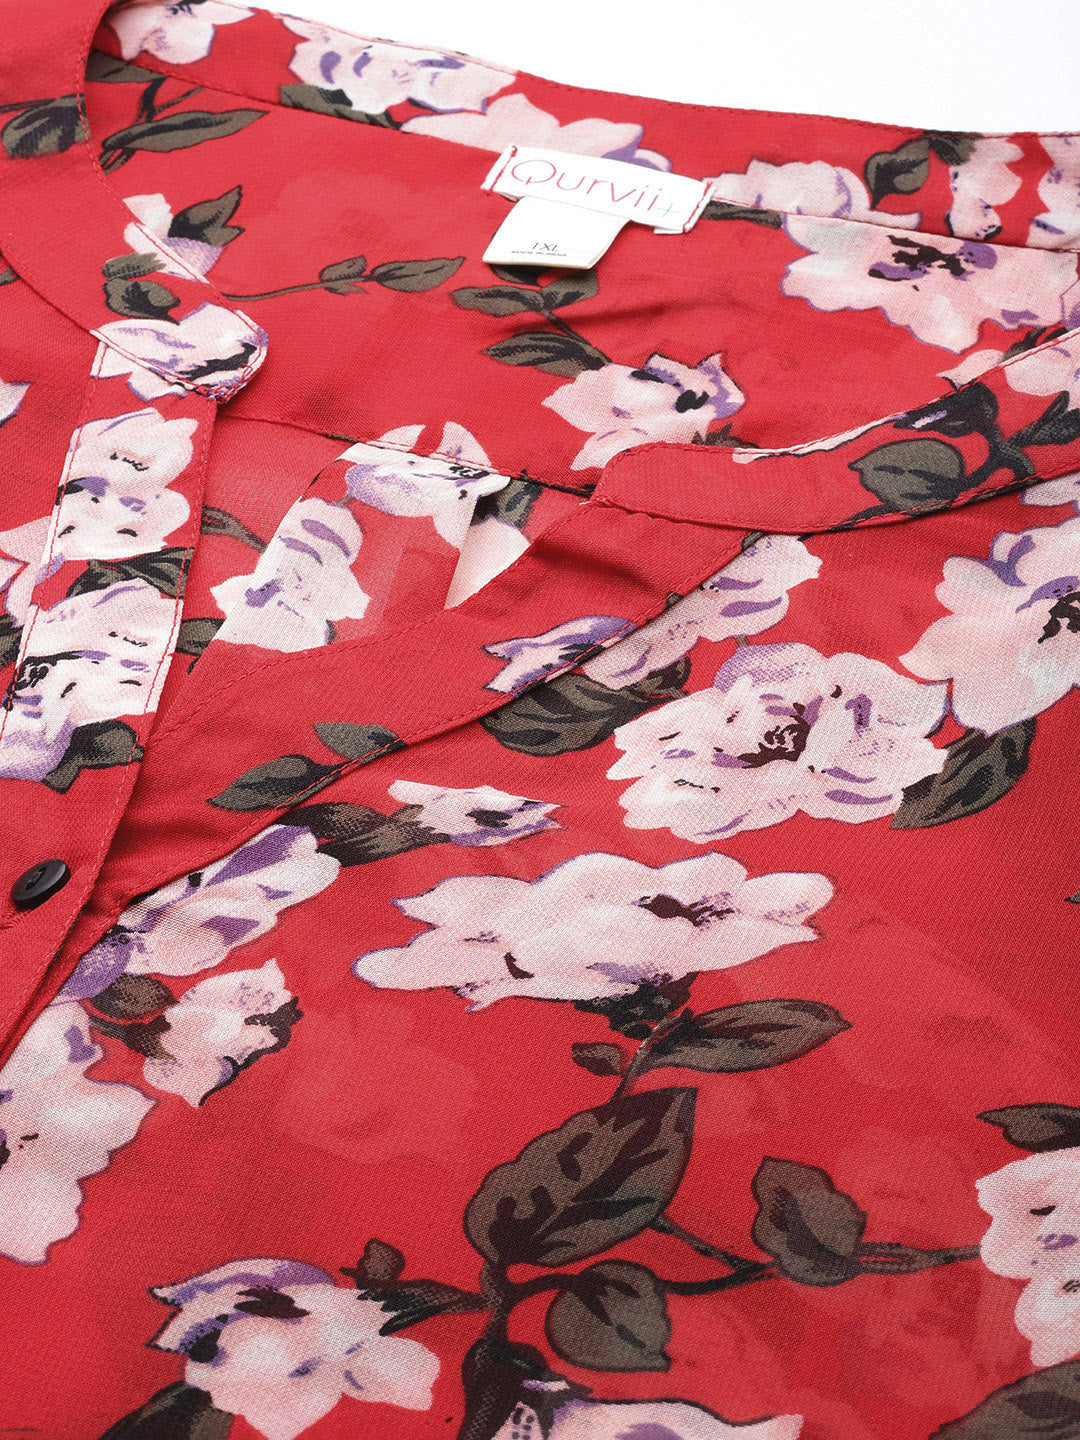 Red Floral georgette Half-Placket shirt with full cuff sleeves.